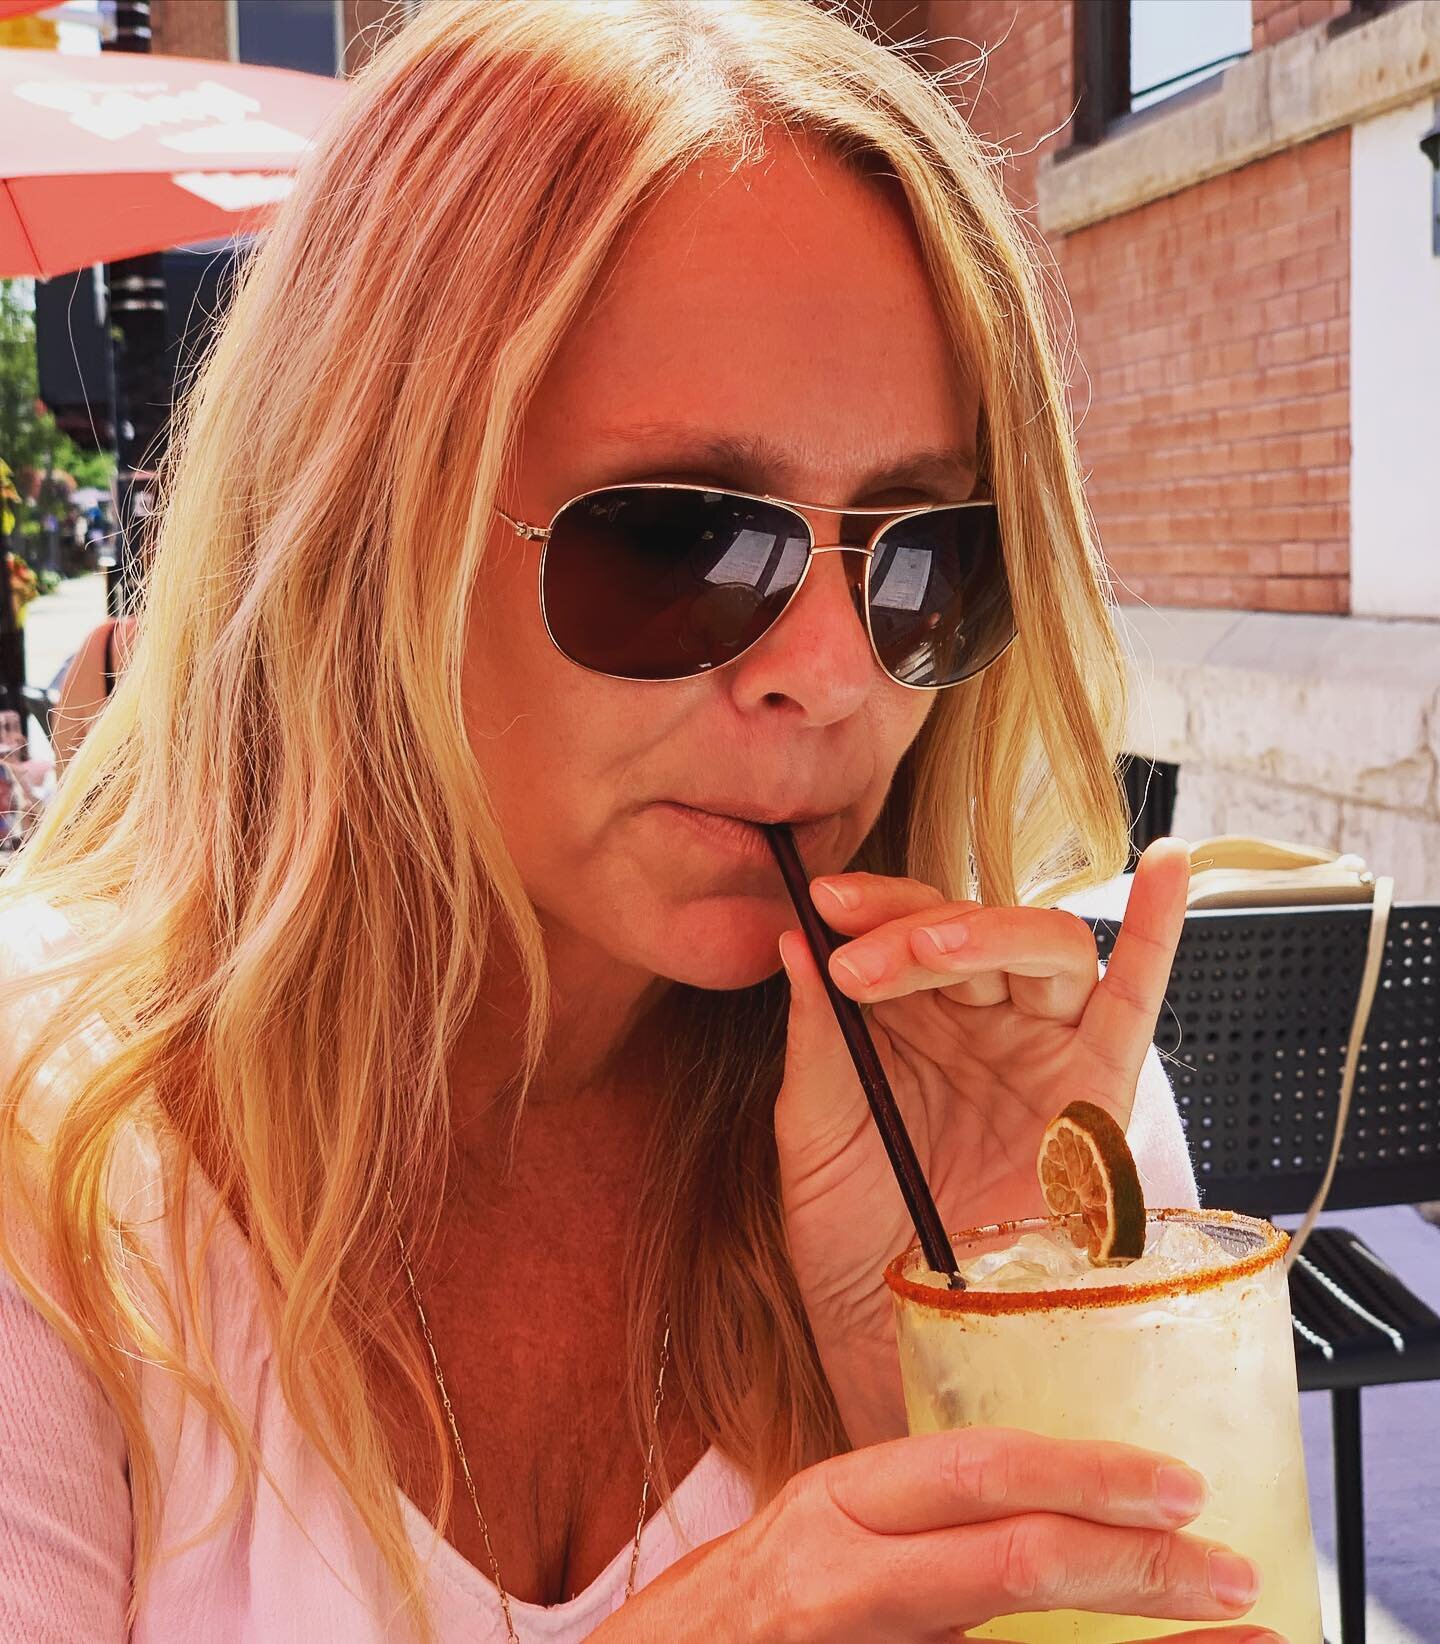 Cheers to Friday!

Patios are open, sun is shining and I was able to help a few customers find the money they needed this week when thought they were out of options. 

Life is good. So are the margaritas  @prettyradbar 

#margaritas #mortgages #mortg